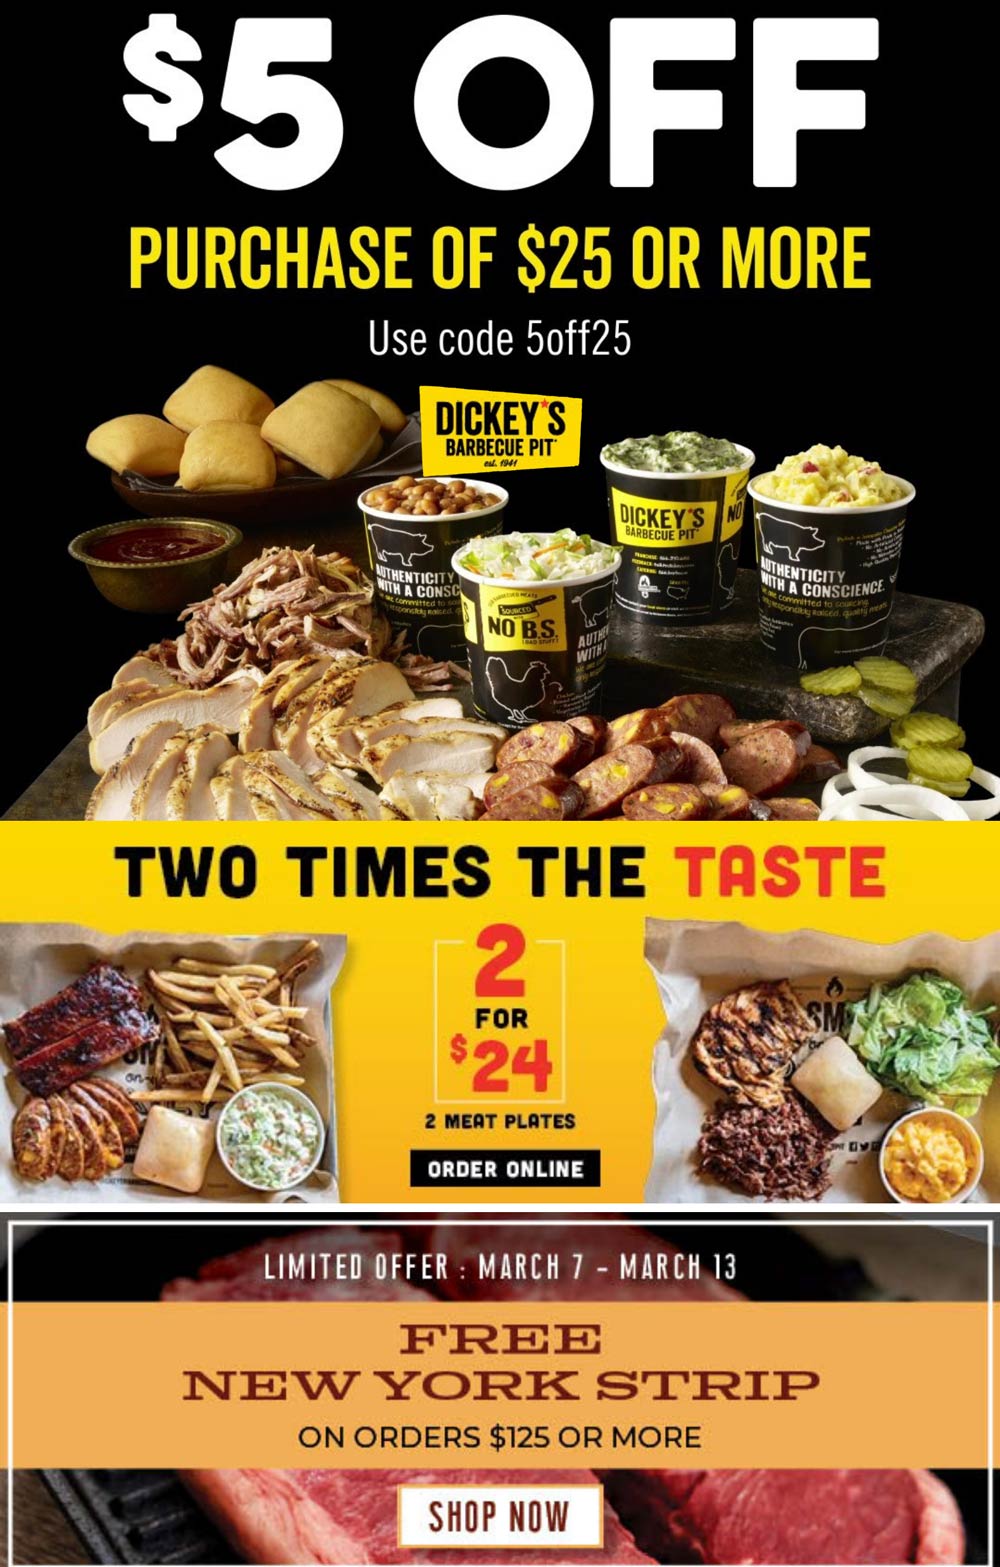 Dickeys Barbecue Pit restaurants Coupon  $5 off $25 at Dickeys Barbecue Pit restaurants via promo code 5off25 #dickeysbarbecuepit 